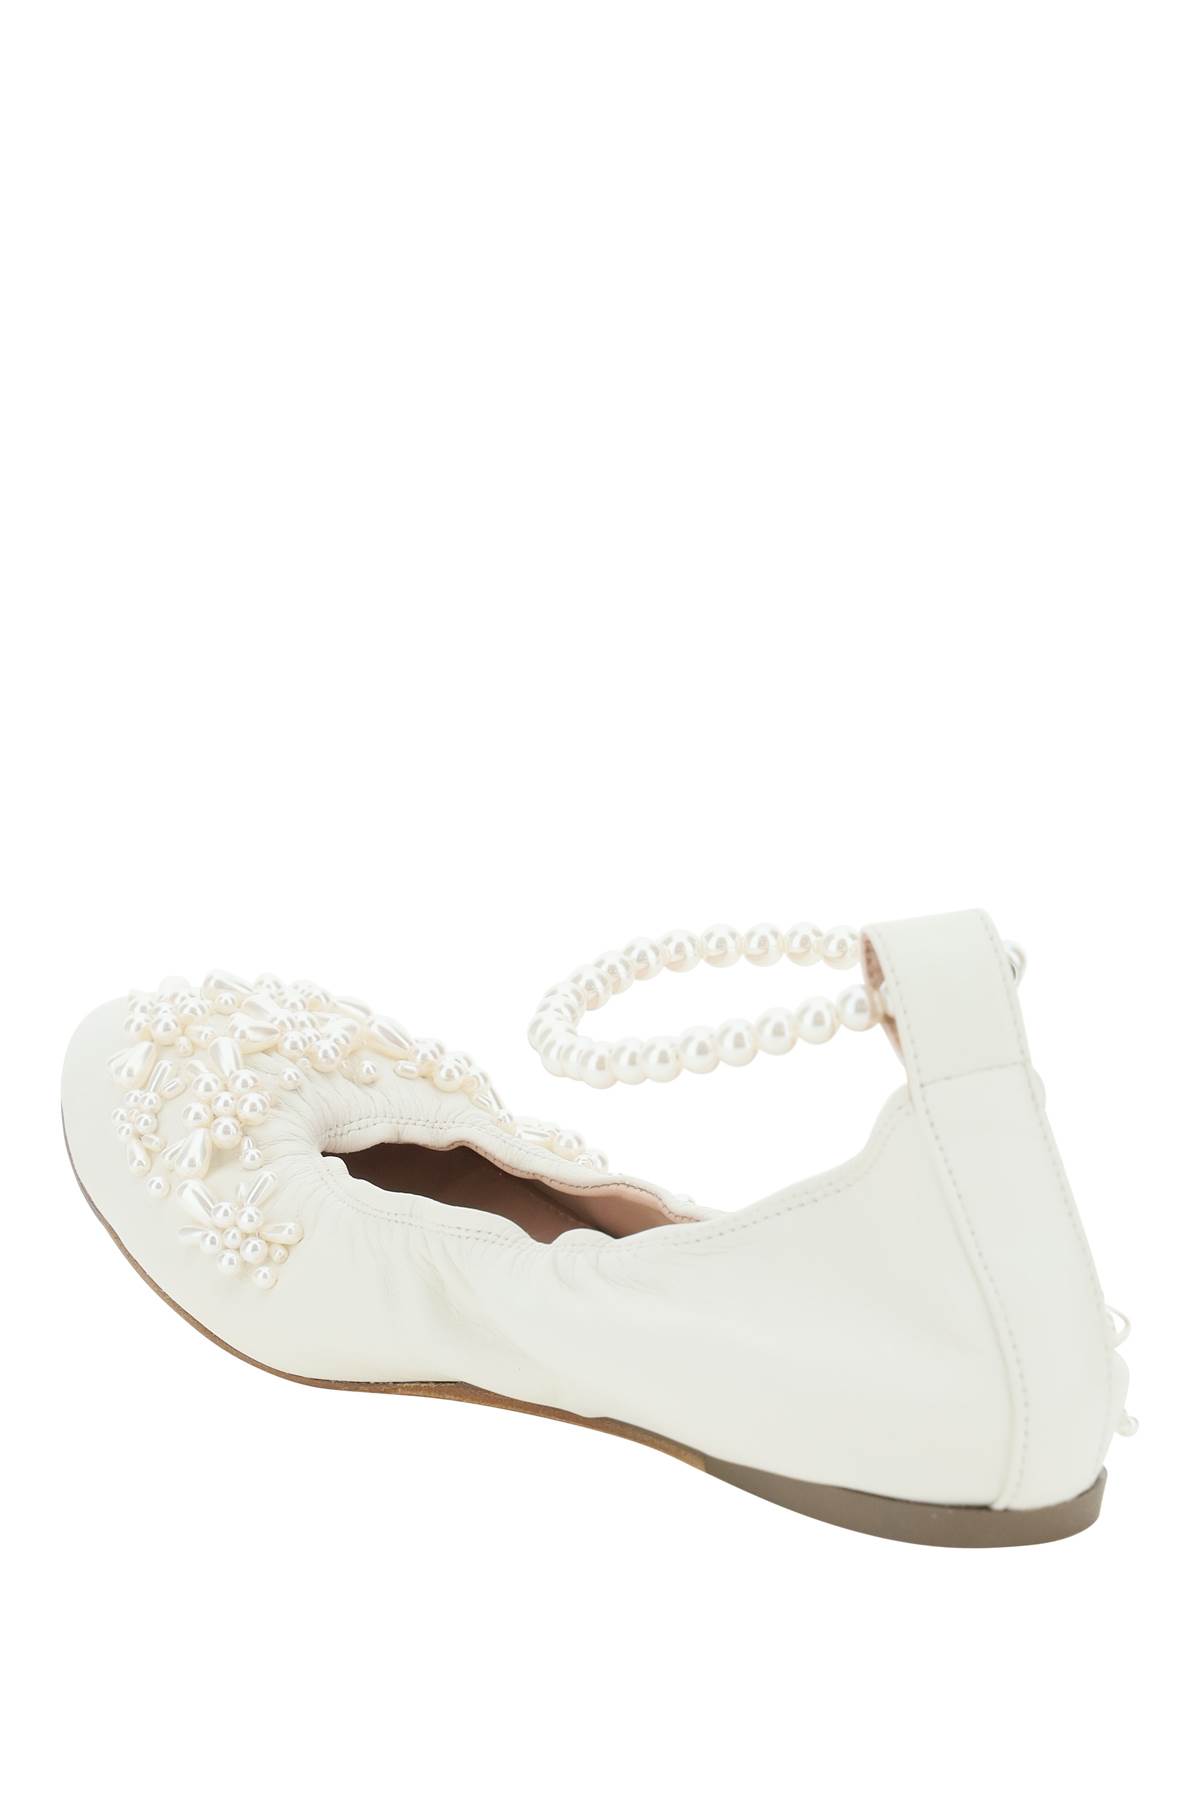 Simone Rocha Embellished Ballerina With Ankle Strap